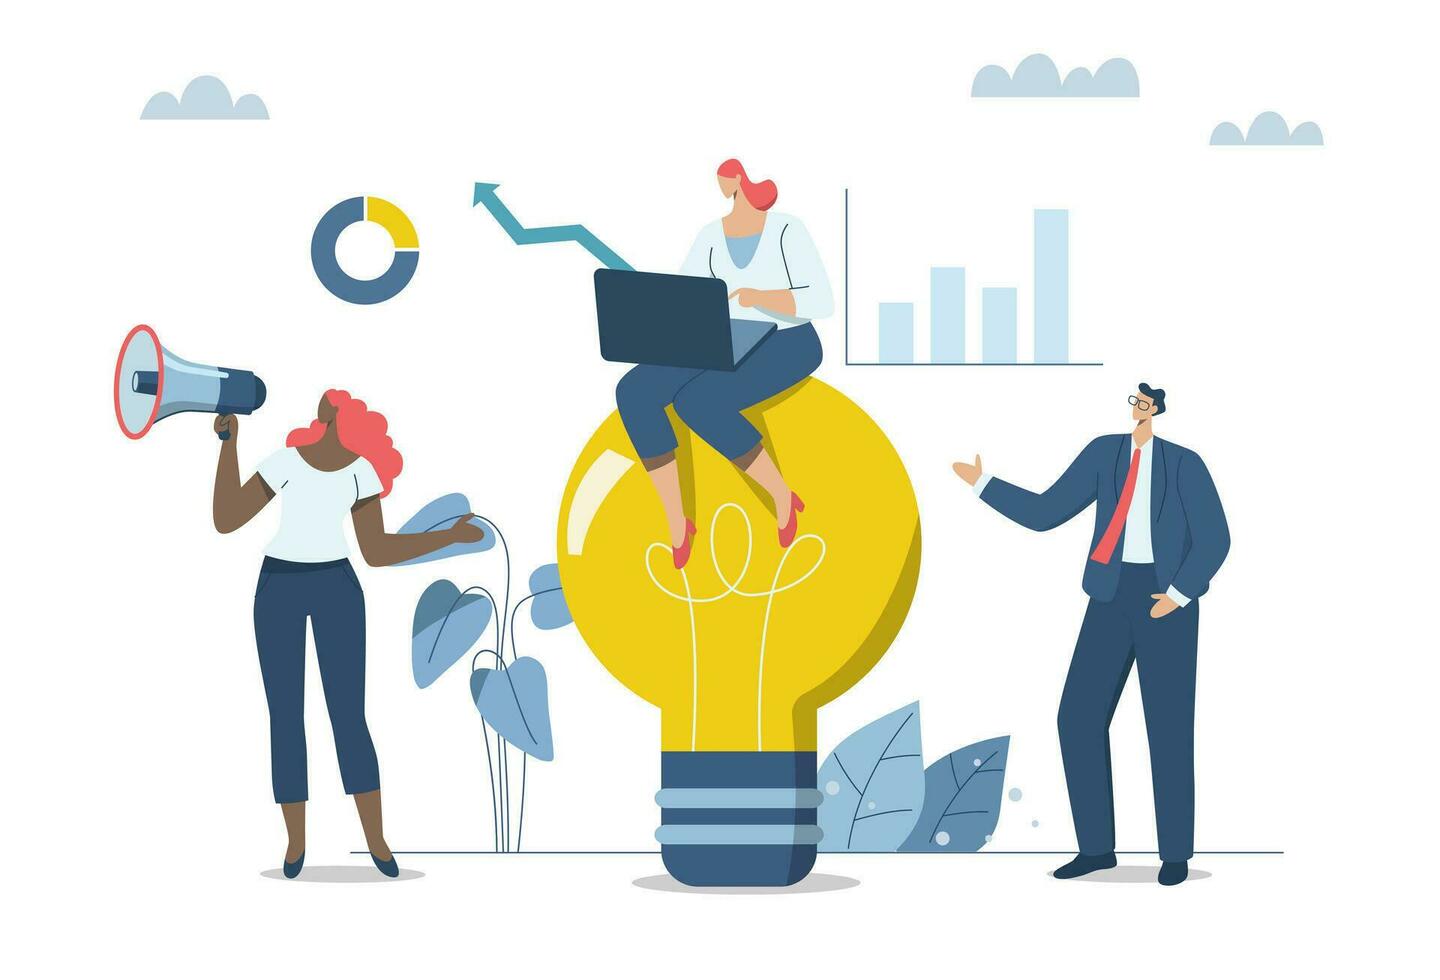 Creativity and inspiration lead to successful teamwork, Ideas about innovation and how to create opportunities for companies to grow and prosper, Team of businessmen working with big idea light bulb. vector